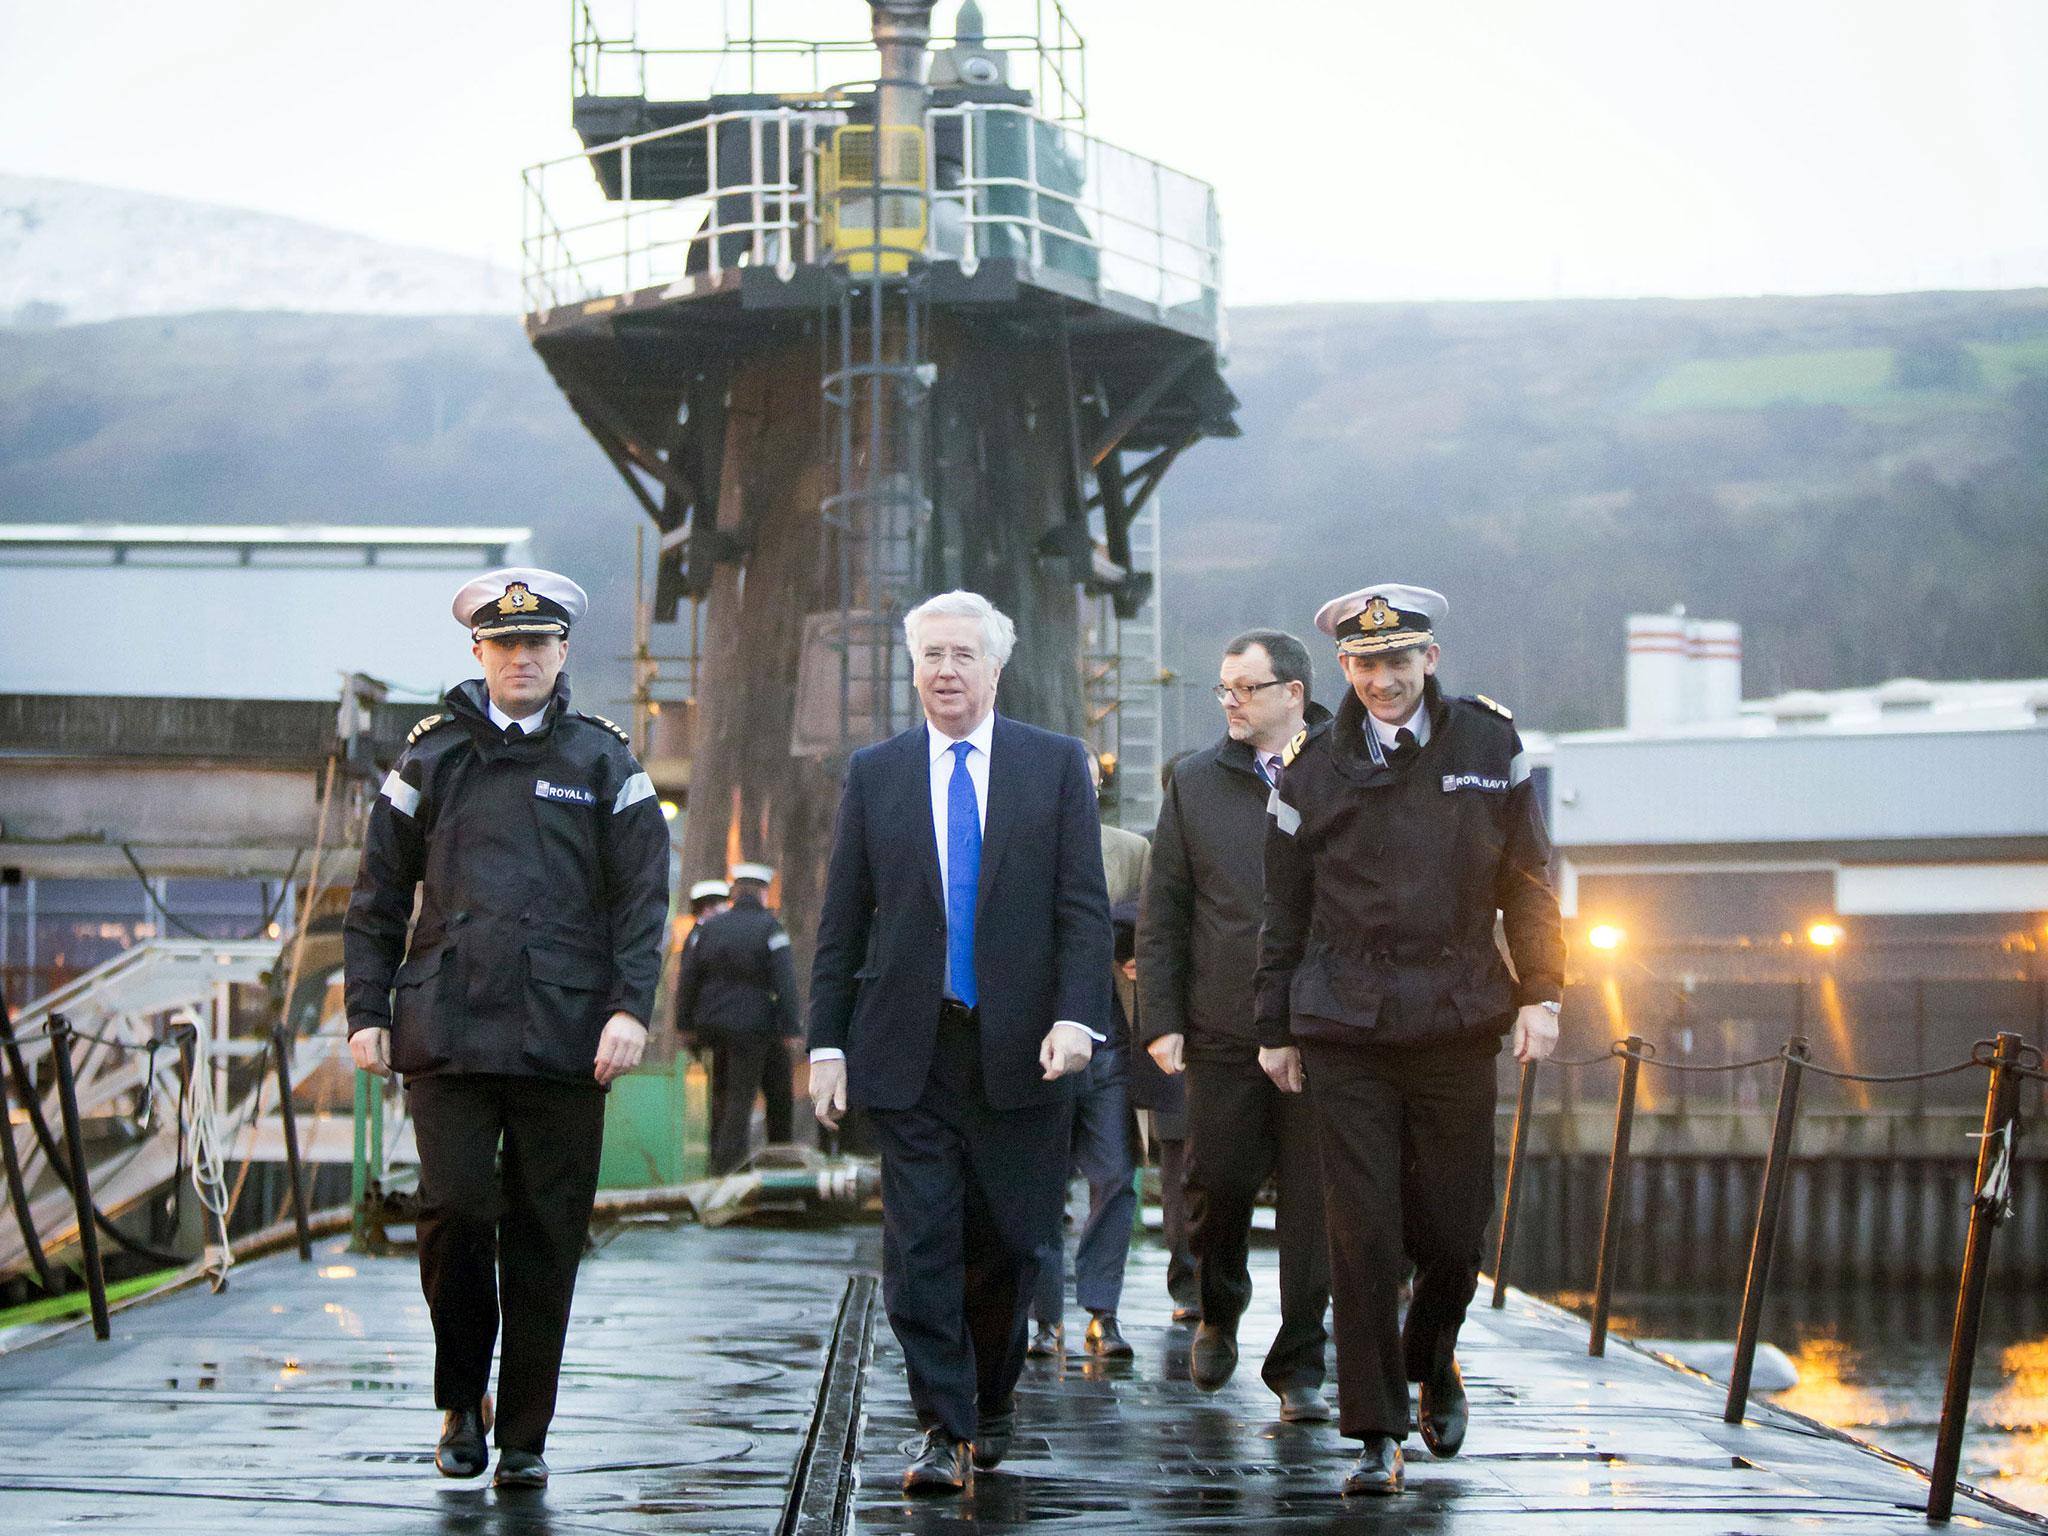 Sir Michael Fallon on board the HMS Vigilant in Clyde. The submarine is one of four vessels carrying the Trident nuclear system